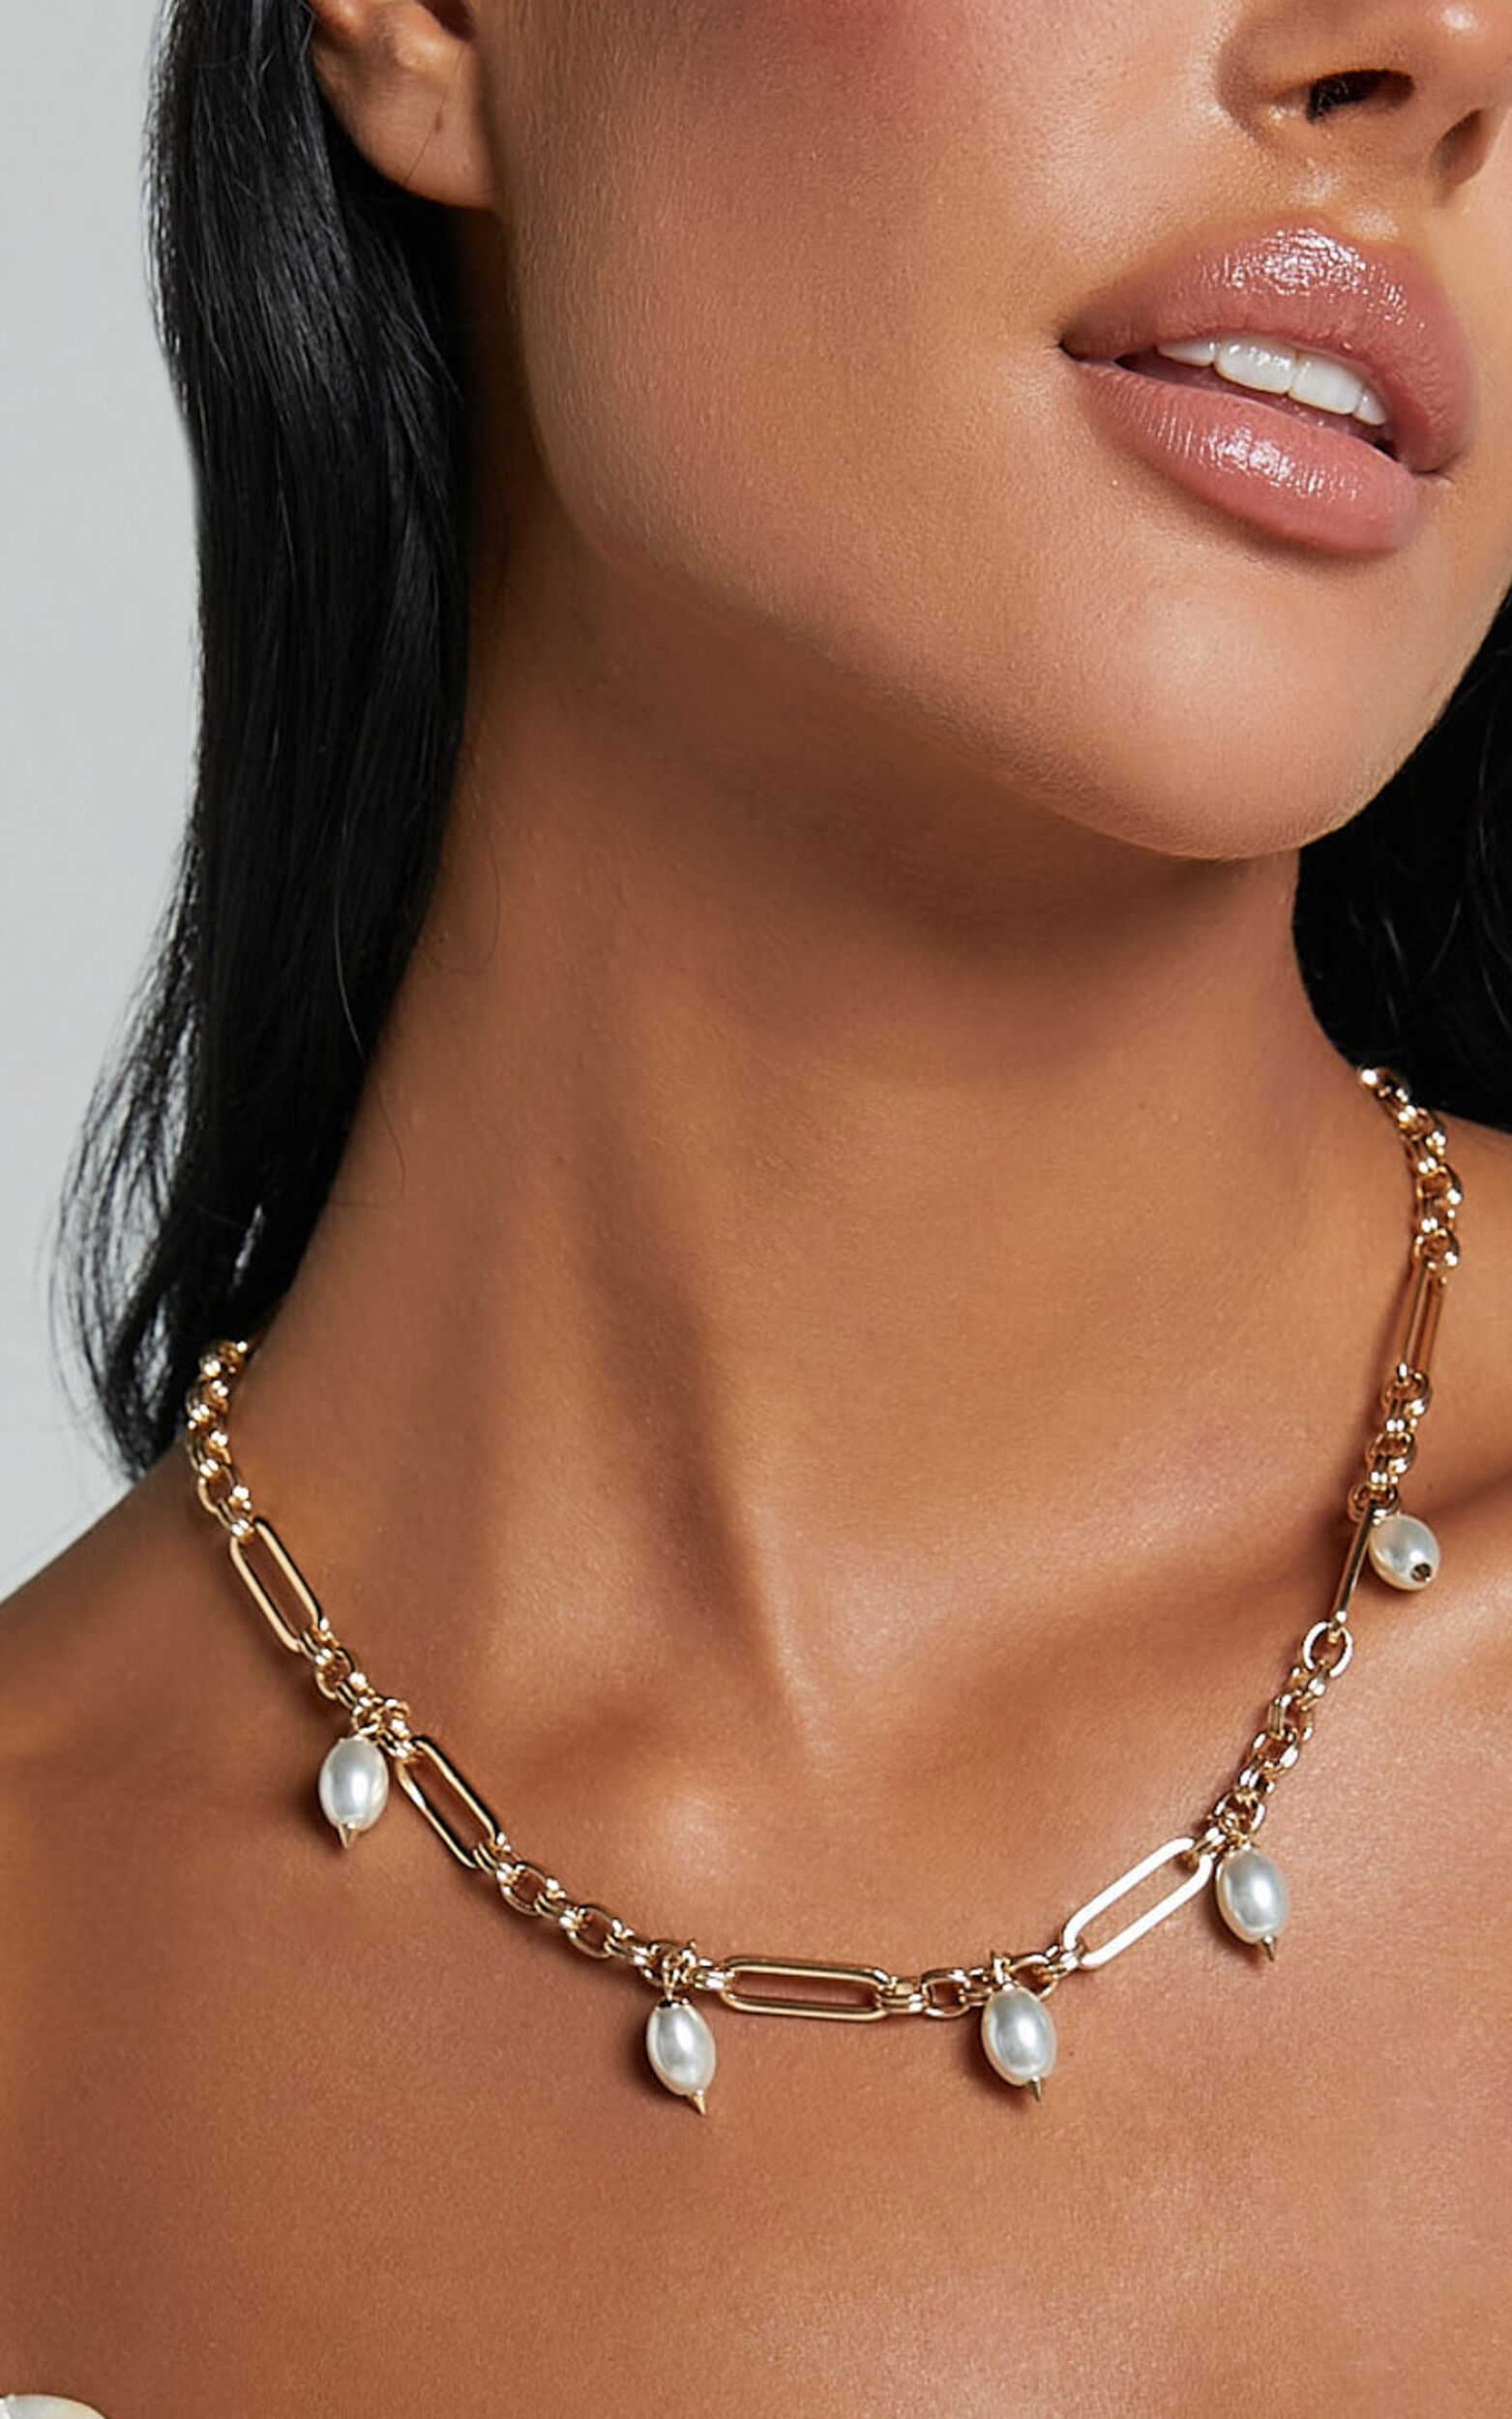 Lausanne Necklace - Pearl Chunky Pendant Necklace in Gold - NoSize, GLD1